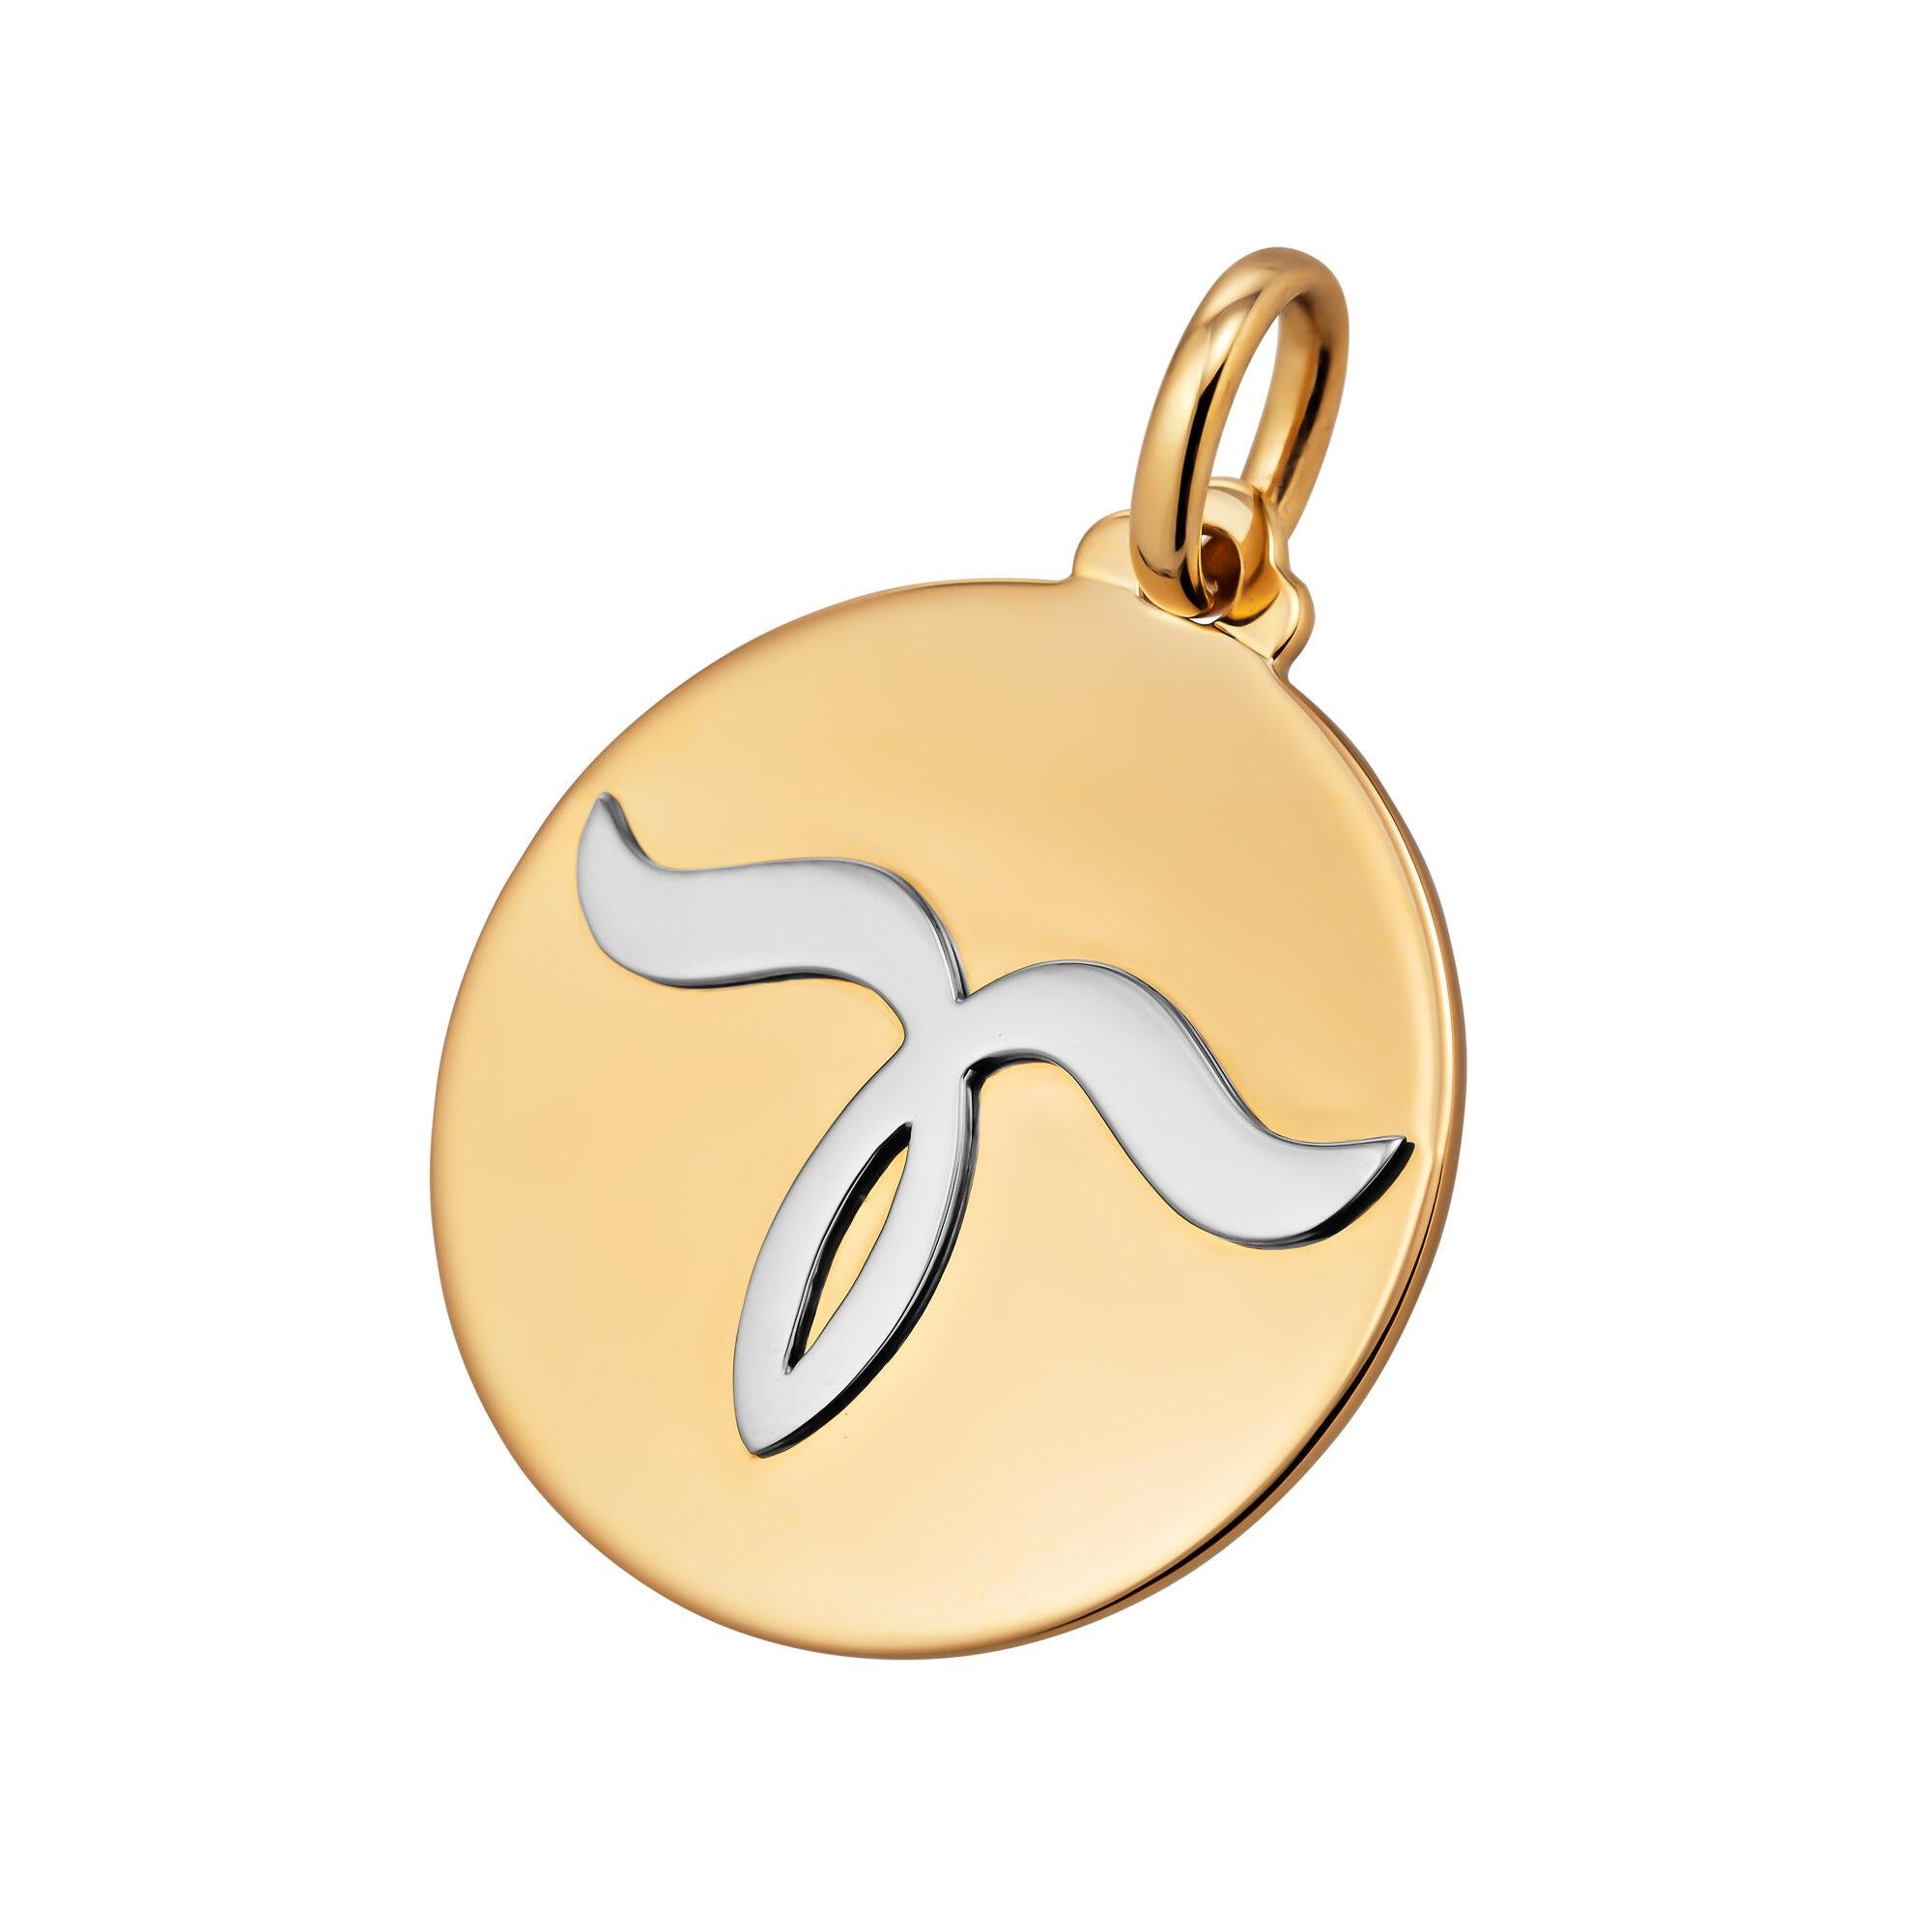 Big, bold, and beautifully modern this Bulgari Aries 18 karat white and yellow gold vintage charm pendant is heavenly.  With a ram's horn design representing this courageous, determined, and confident sign, you will feel it's celestial spirit the